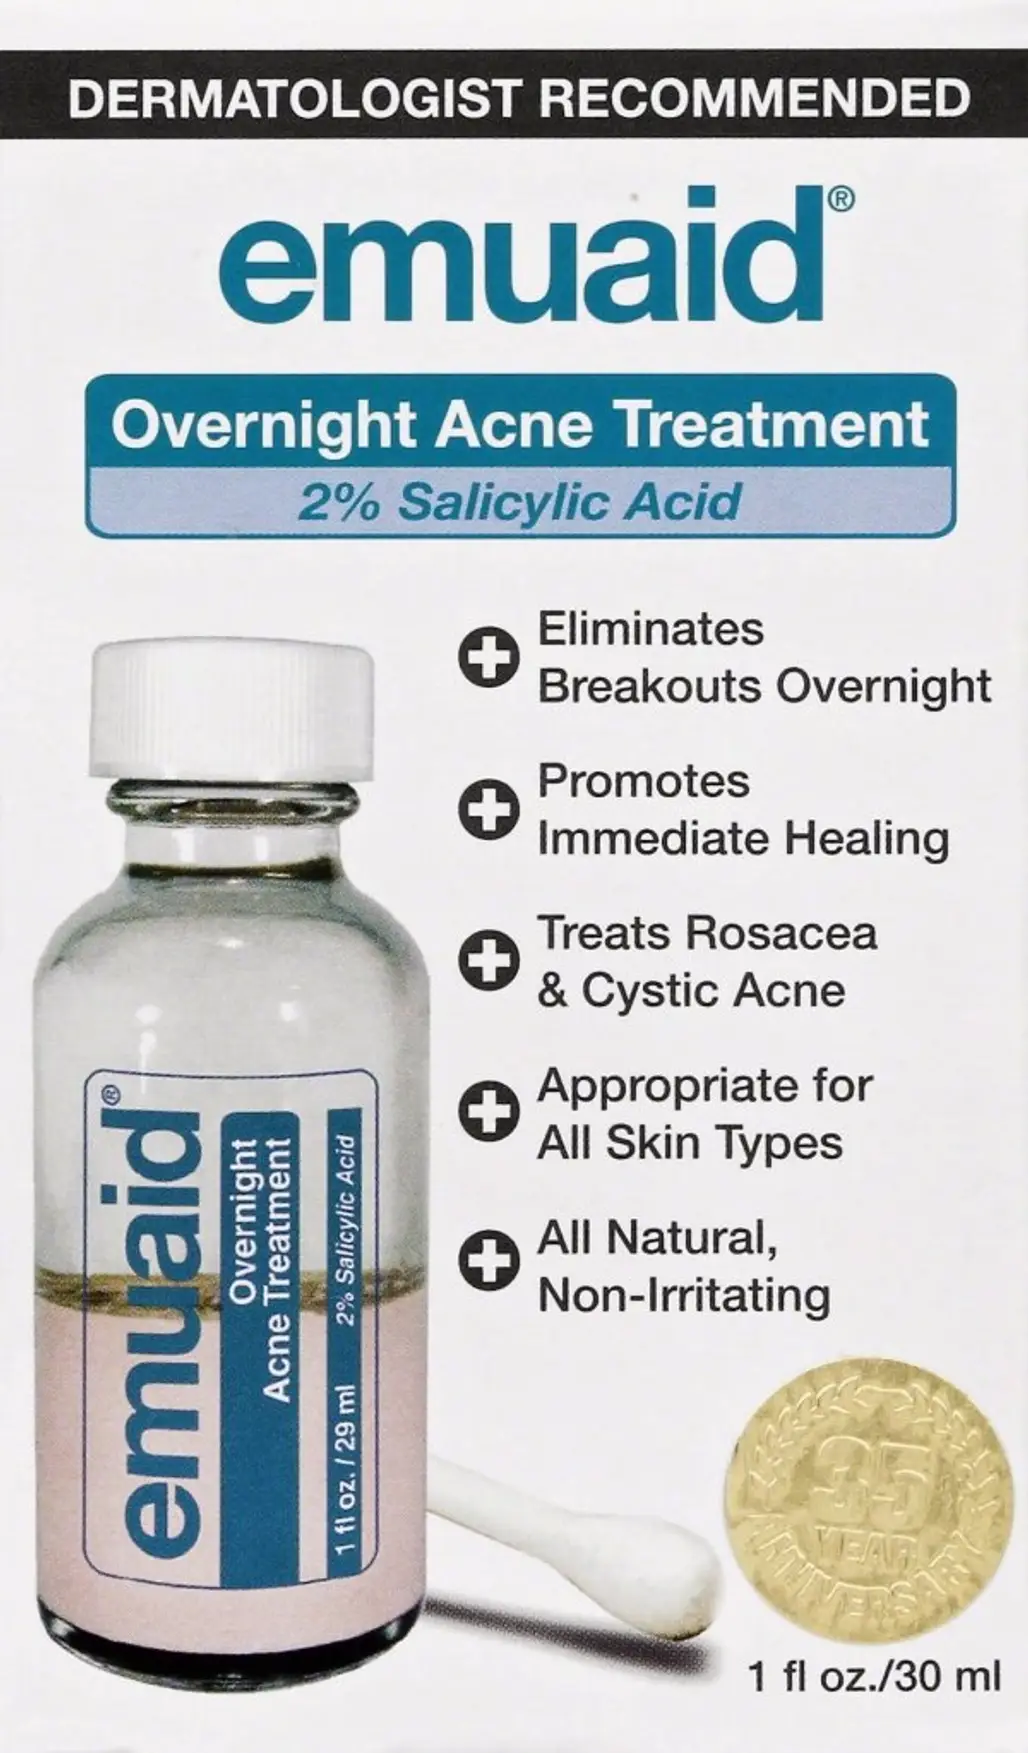 DERMATOLOGIST, RECOMMENDED, emuaid, overnight, Acne,